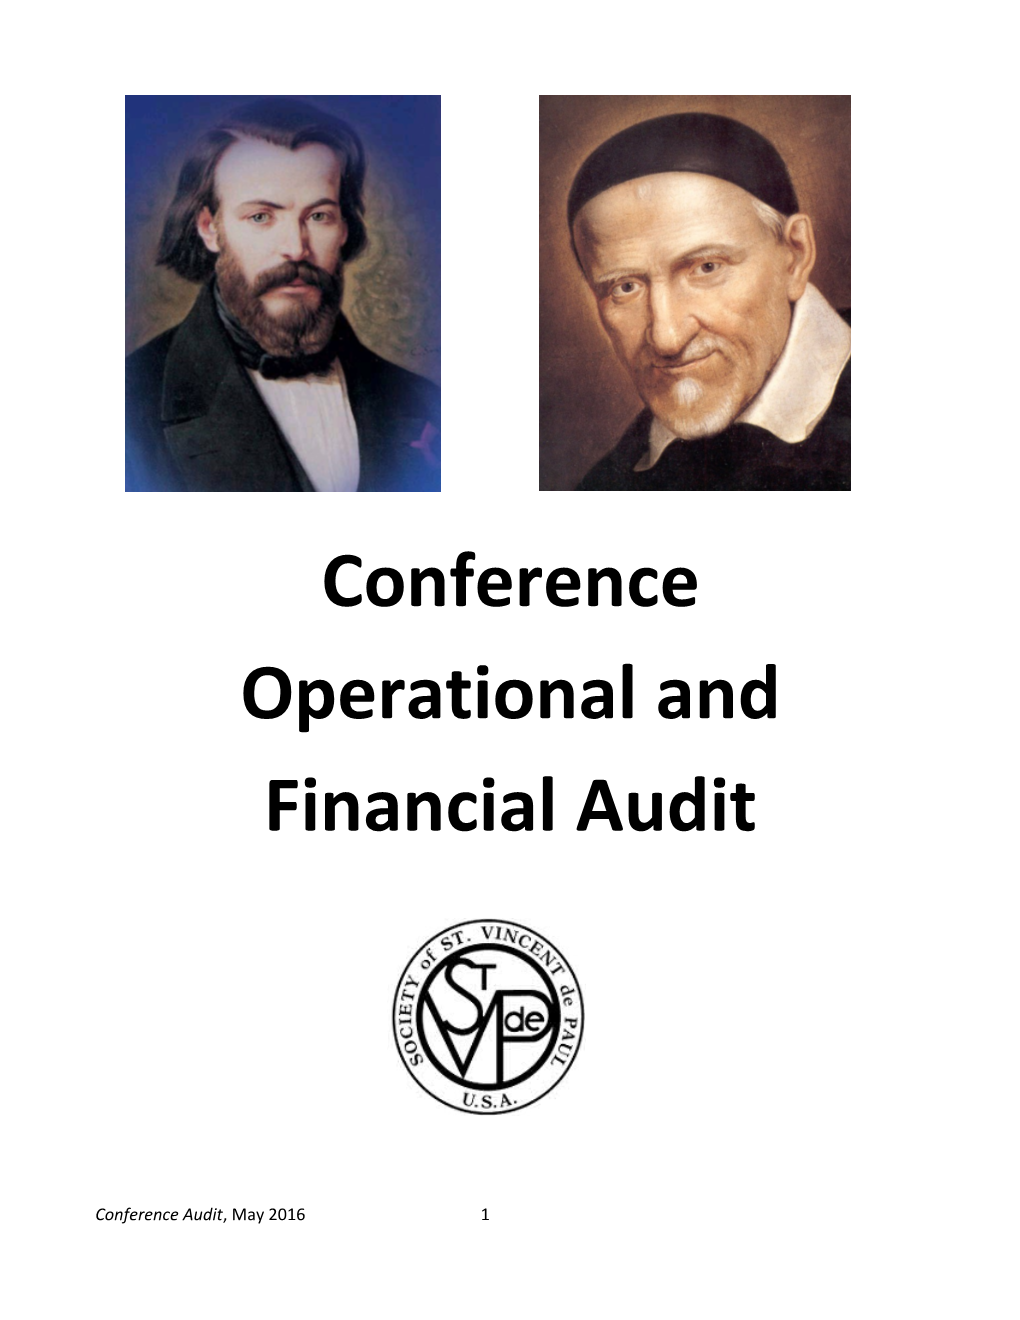 Conference Operational and Financial Audit